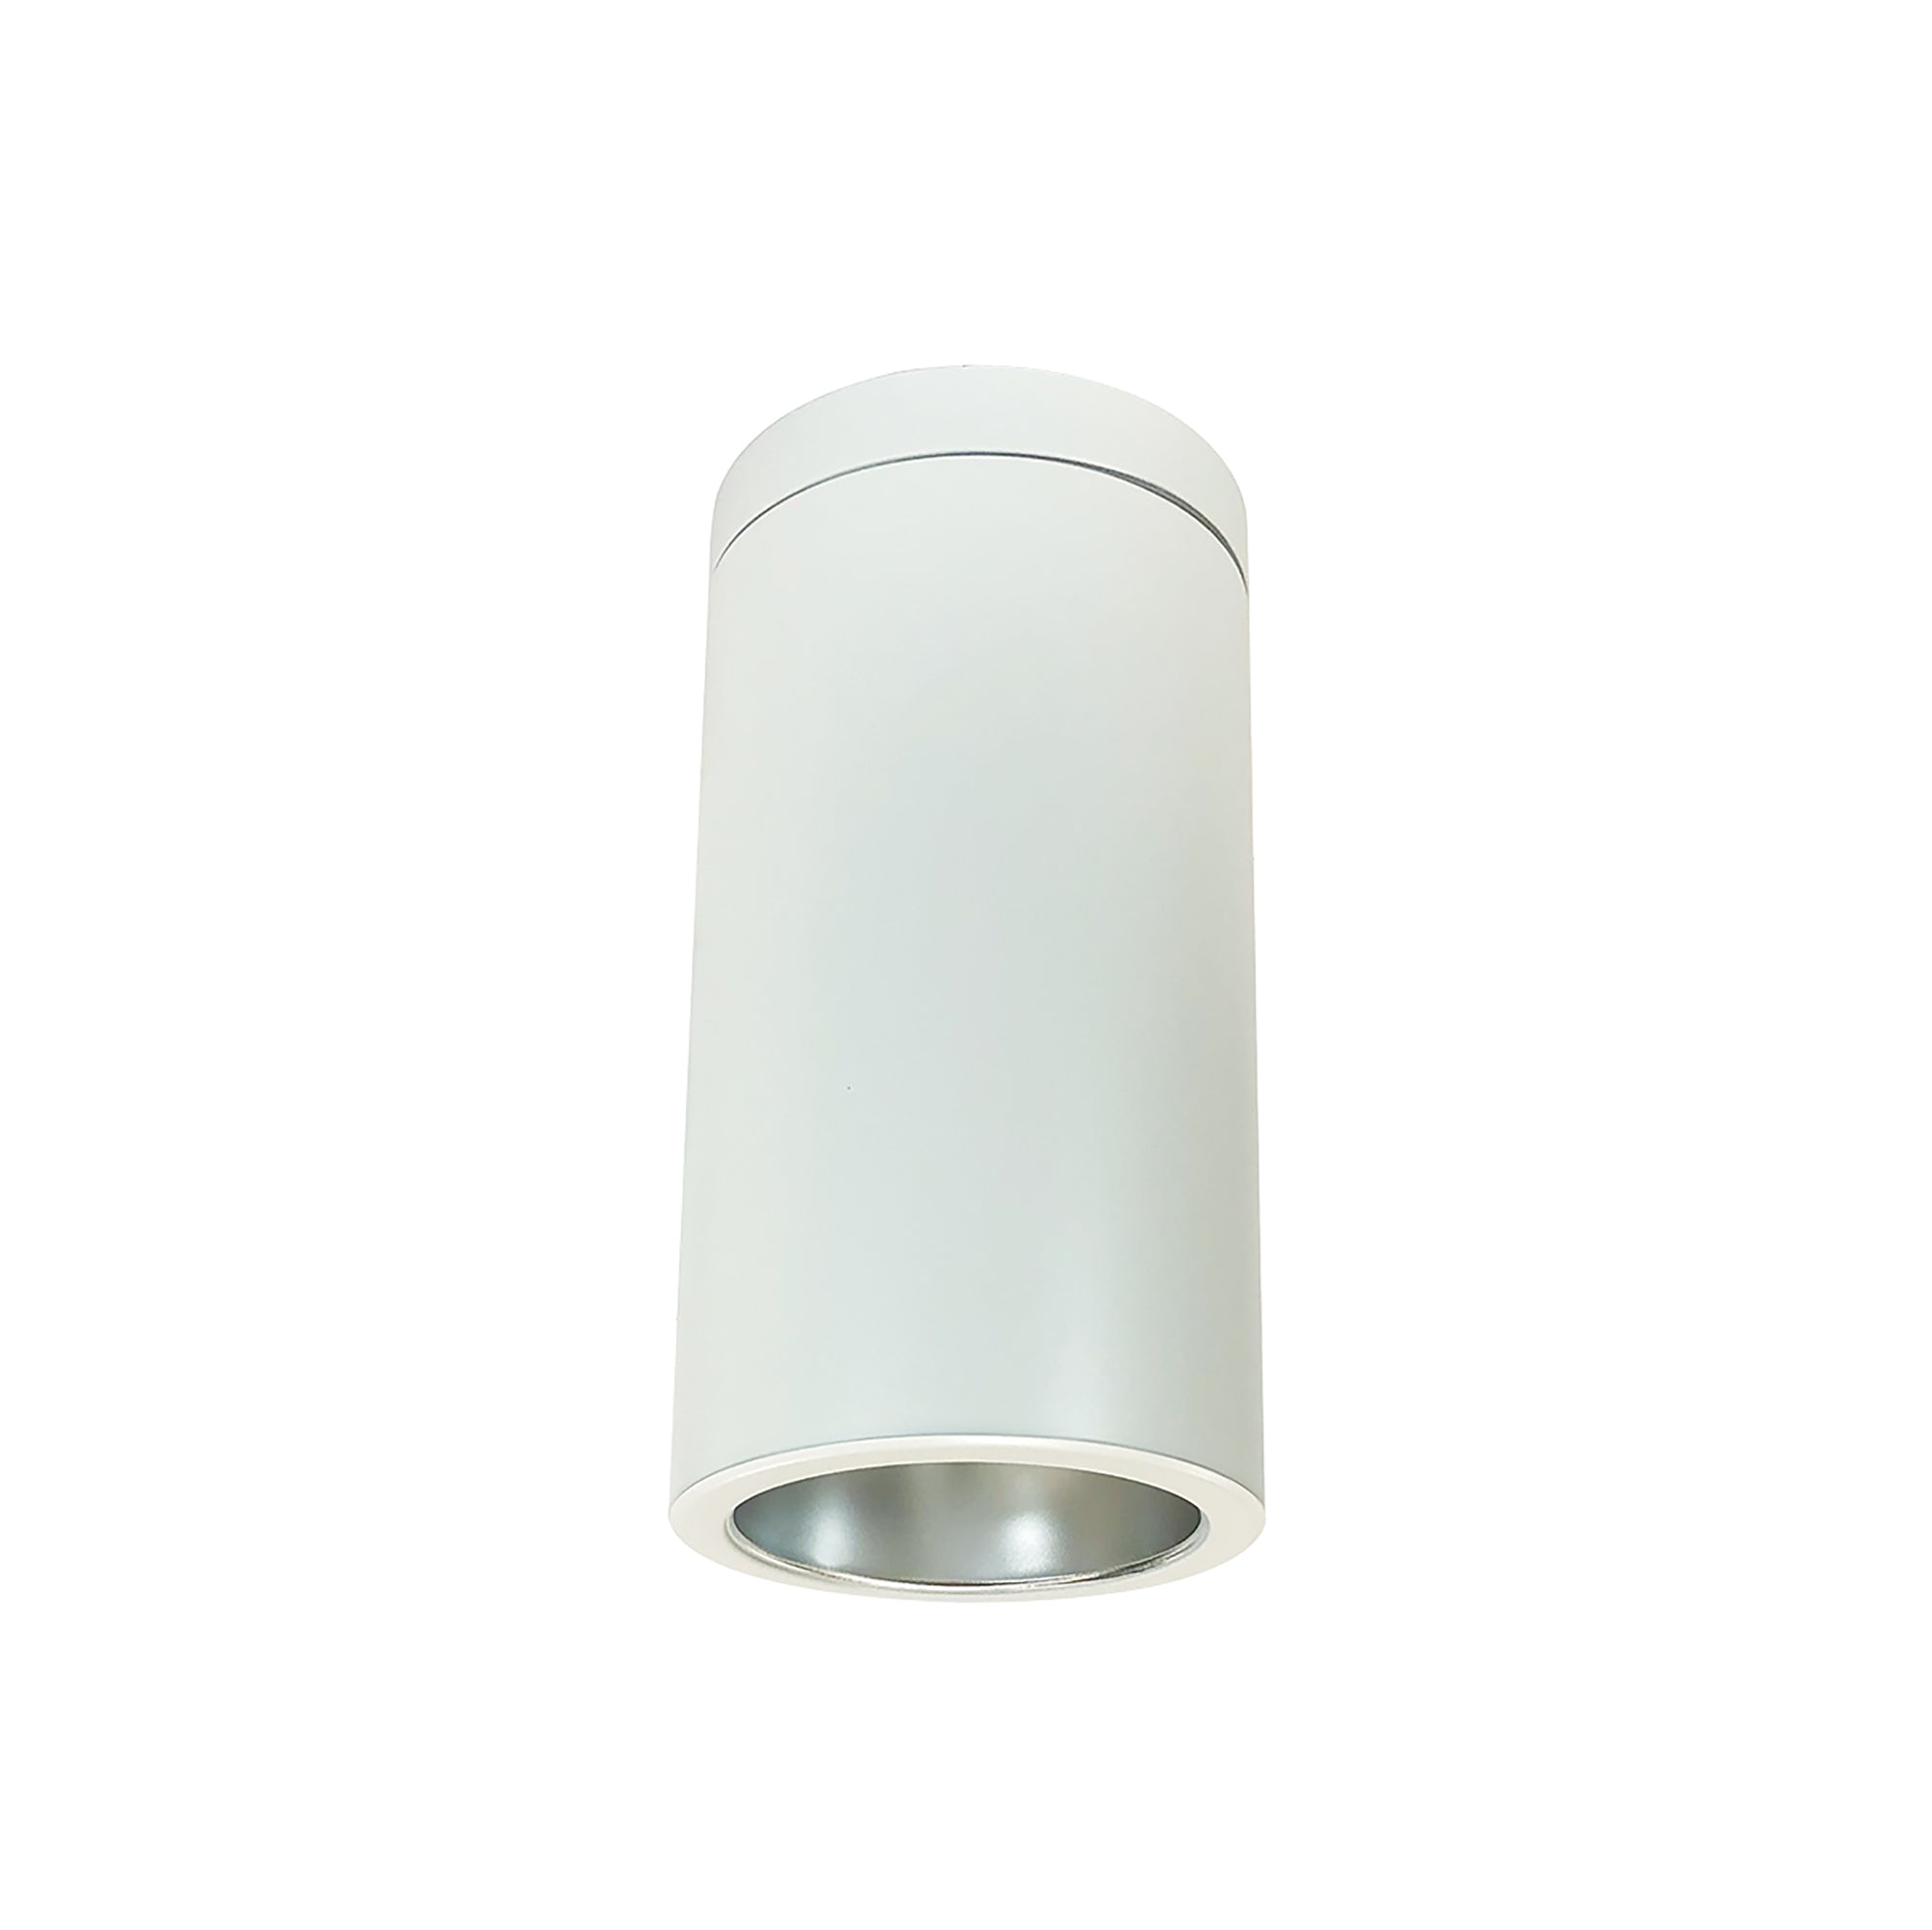 Nora Lighting NYLS2-6S15130MDWW6 - Cylinder - 6 Inch CYL SURFACE 1500LM REF 40K DIFF/WHT WHT CYL 120-277 0-10V